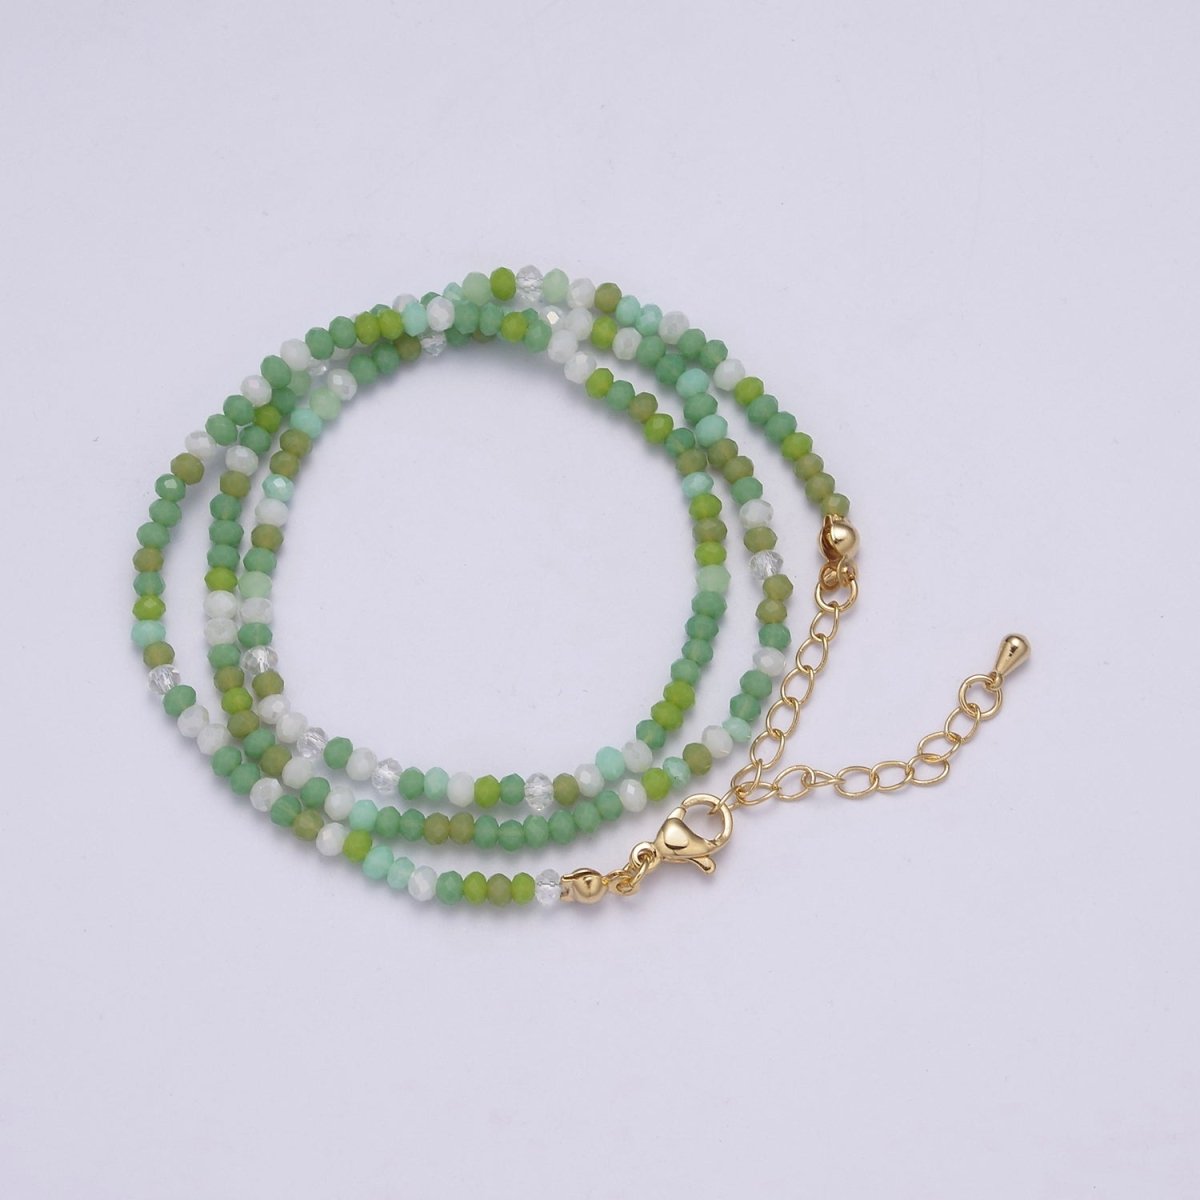 Green Aventurine Beaded Necklace 18 inch long + 2 inch extender Ready to Wear Bead Jewelry | WA-451 Clearance Pricing - DLUXCA